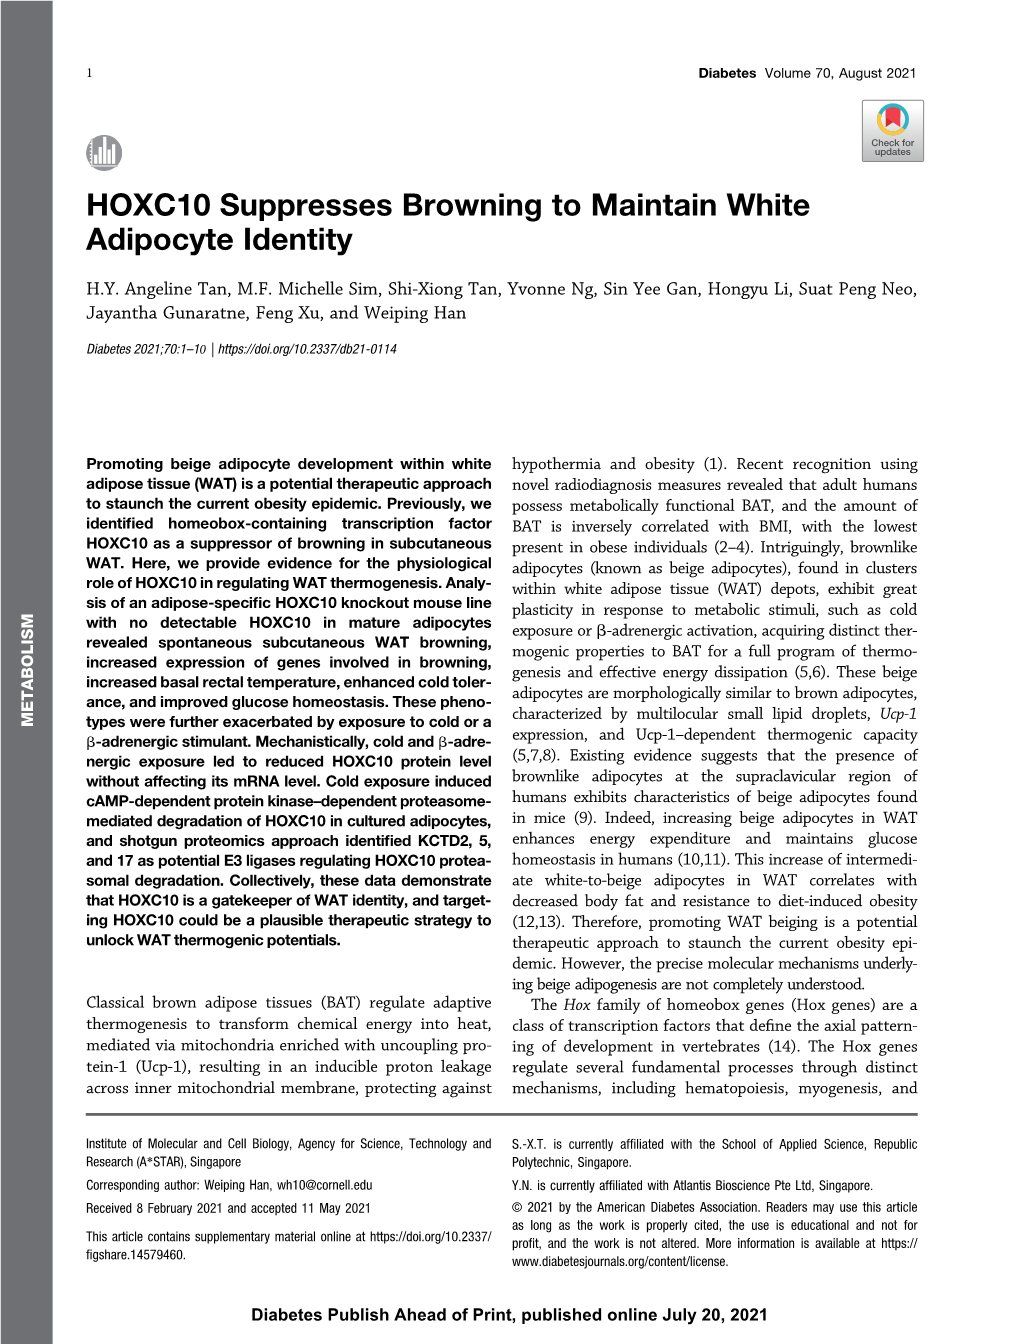 HOXC10 Suppresses Browning to Maintain White Adipocyte Identity